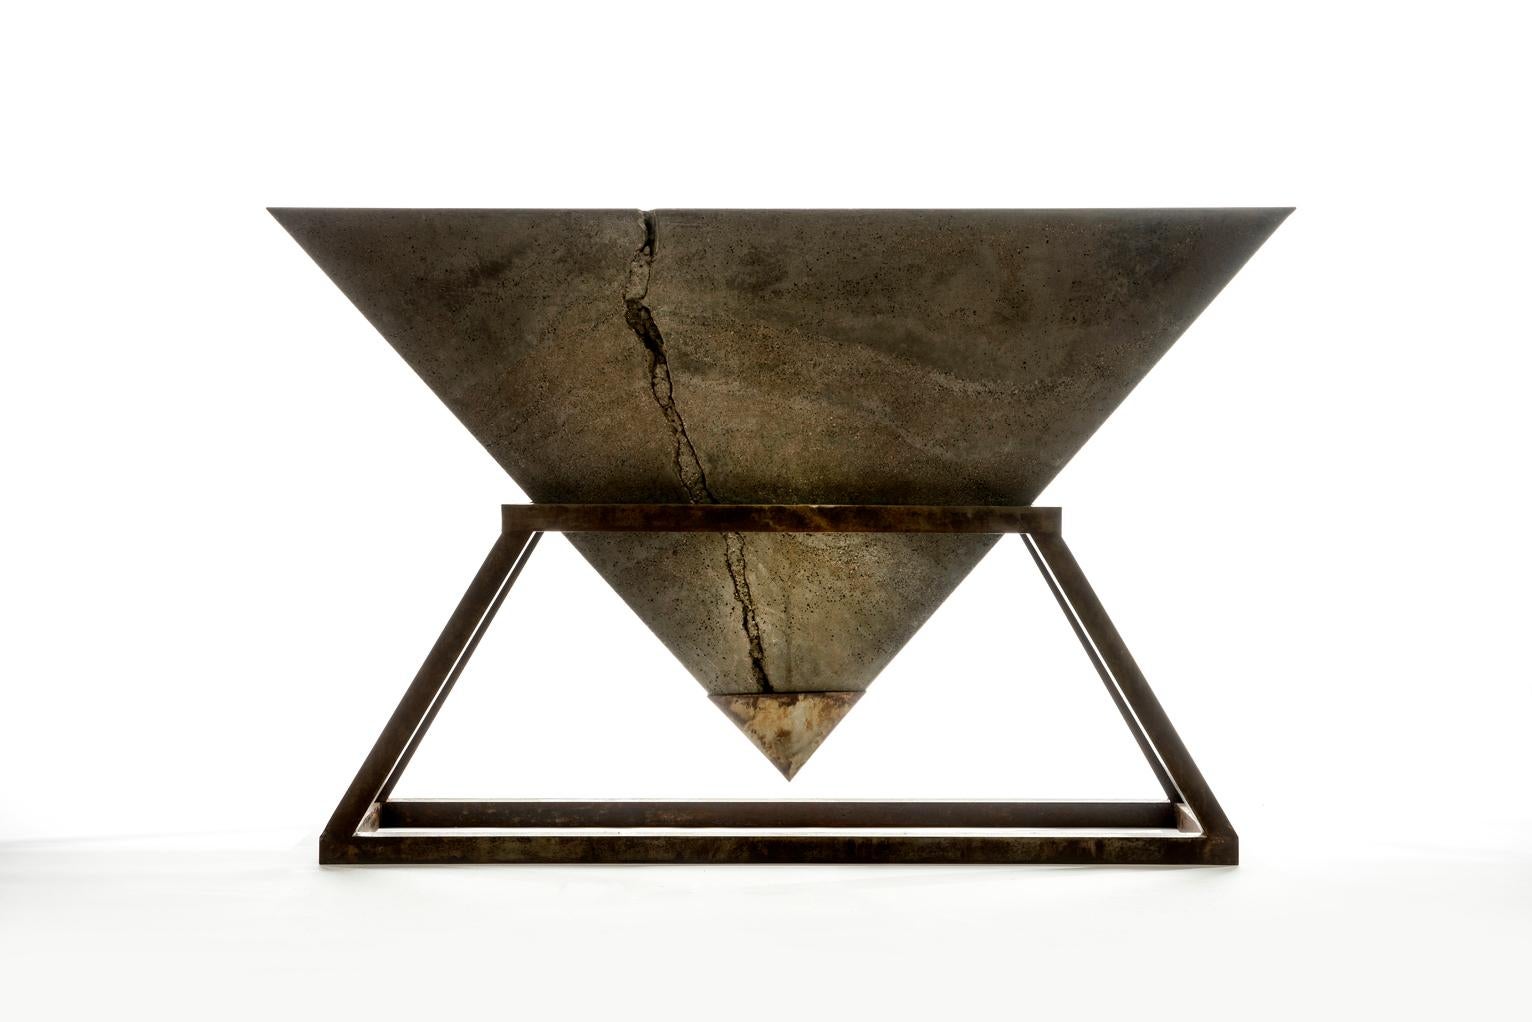 Kheops Console is a concrete and aluminium console table designed by Harow Studio.